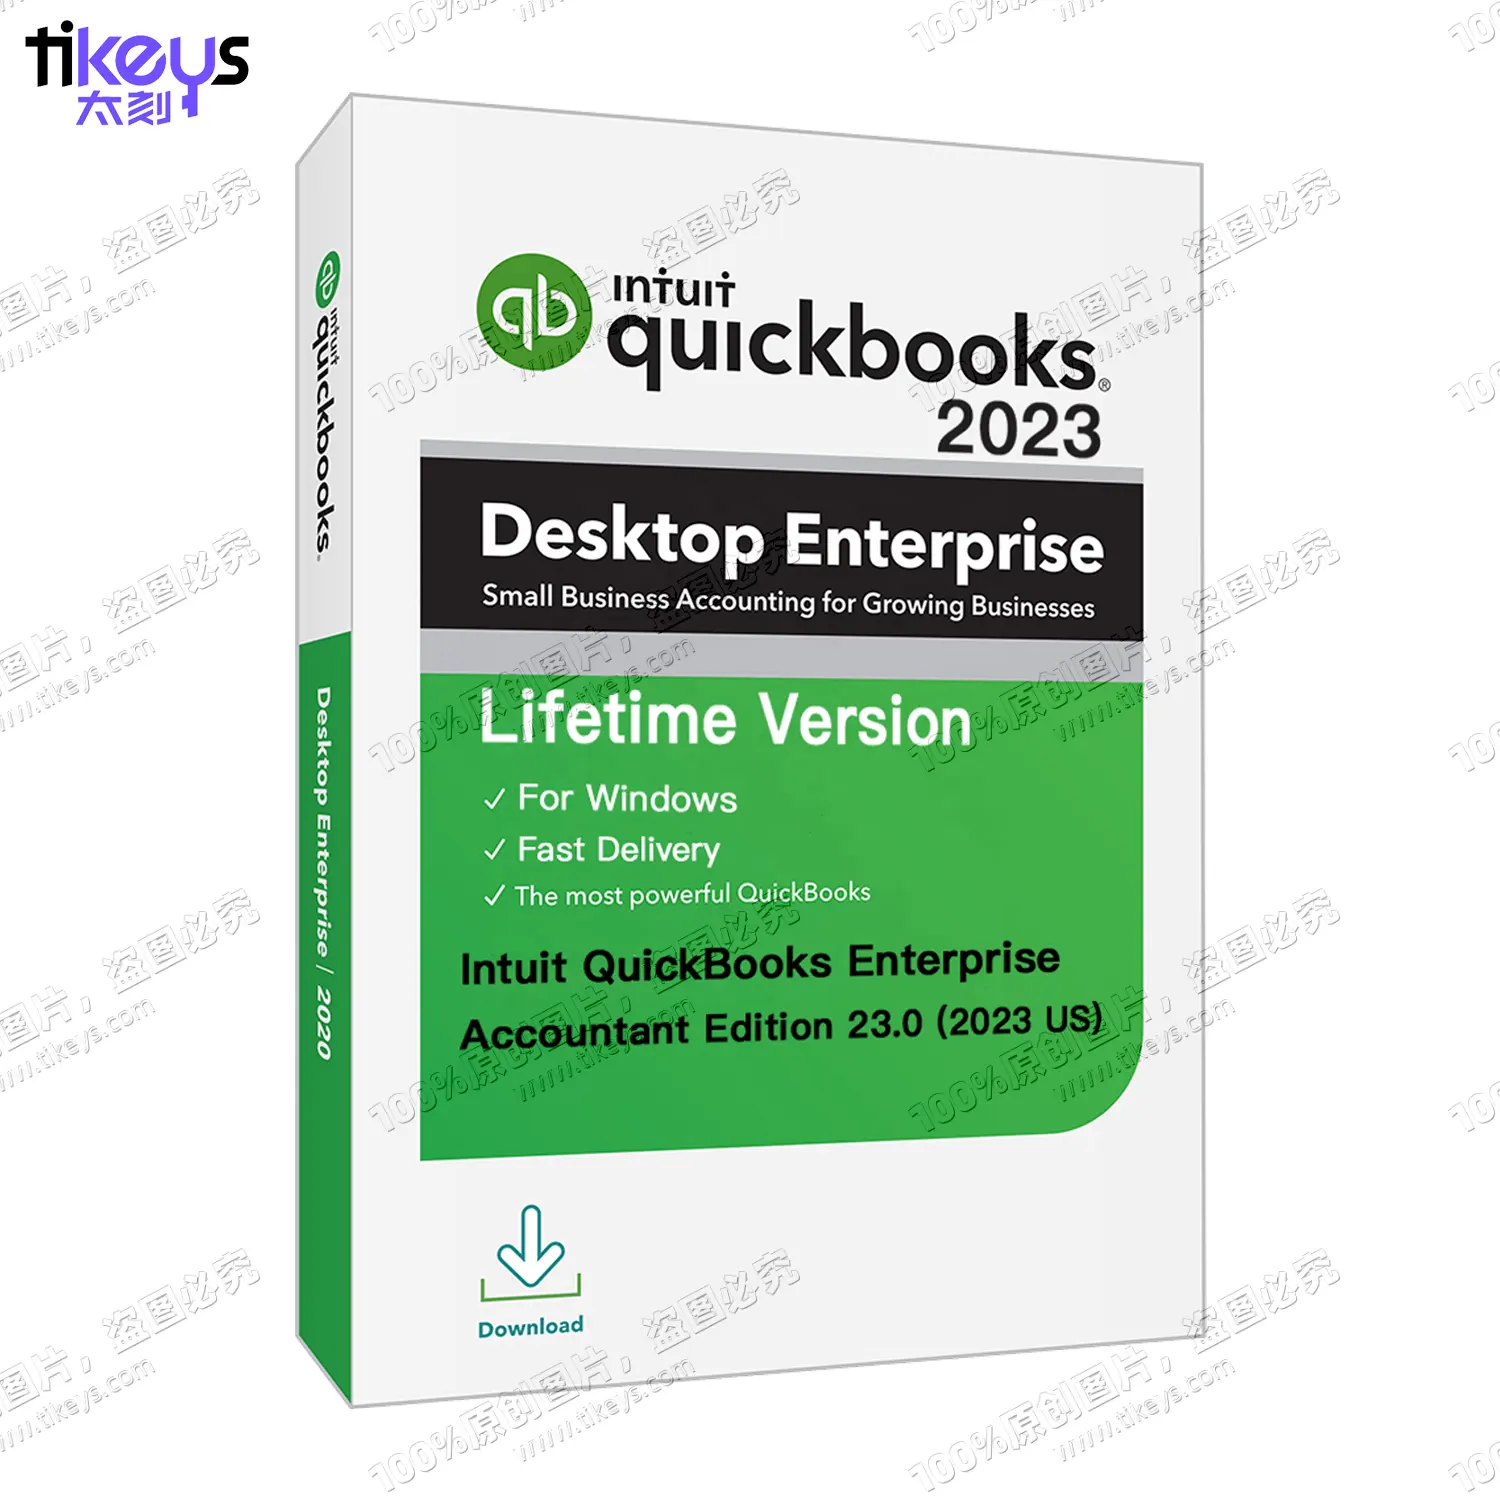 24/7 Online Email Delivery Intuit QuickBook Enterprise Accountant Edition 23.0 2023 US Lifetime Financial Accounting Software